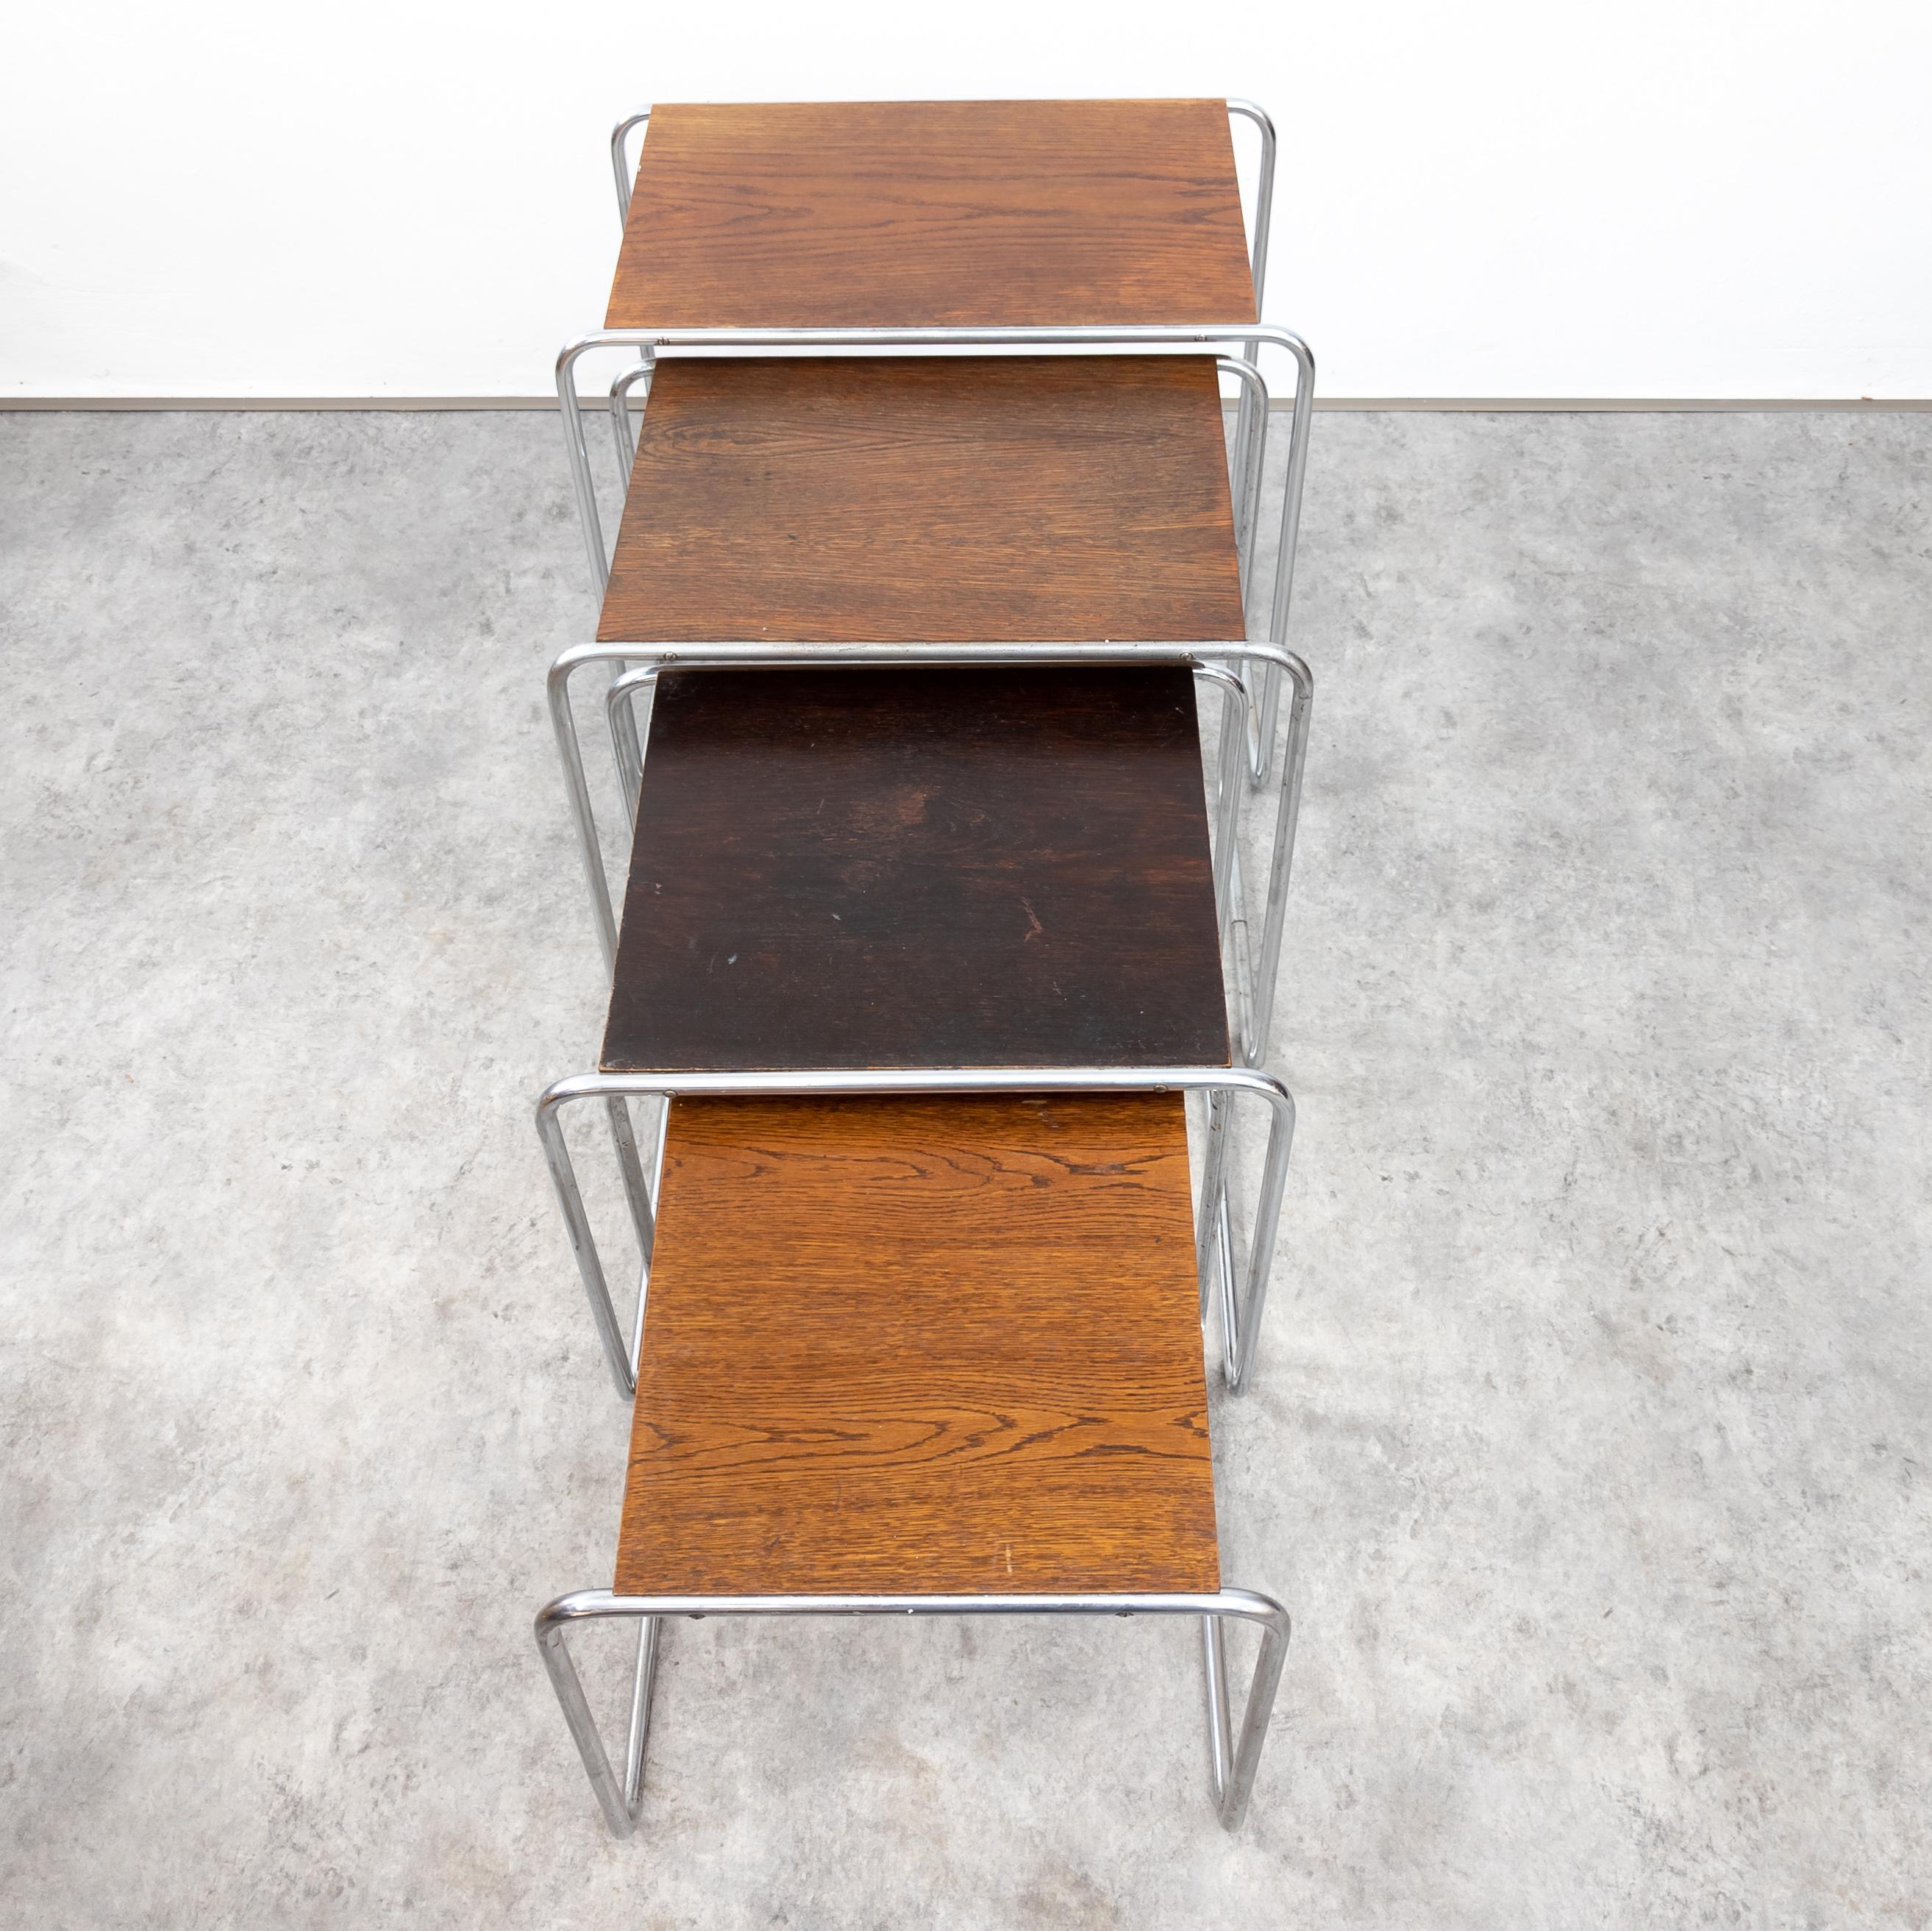 Early Thonet B 9 Nesting Tables by Marcel Breuer For Sale 2